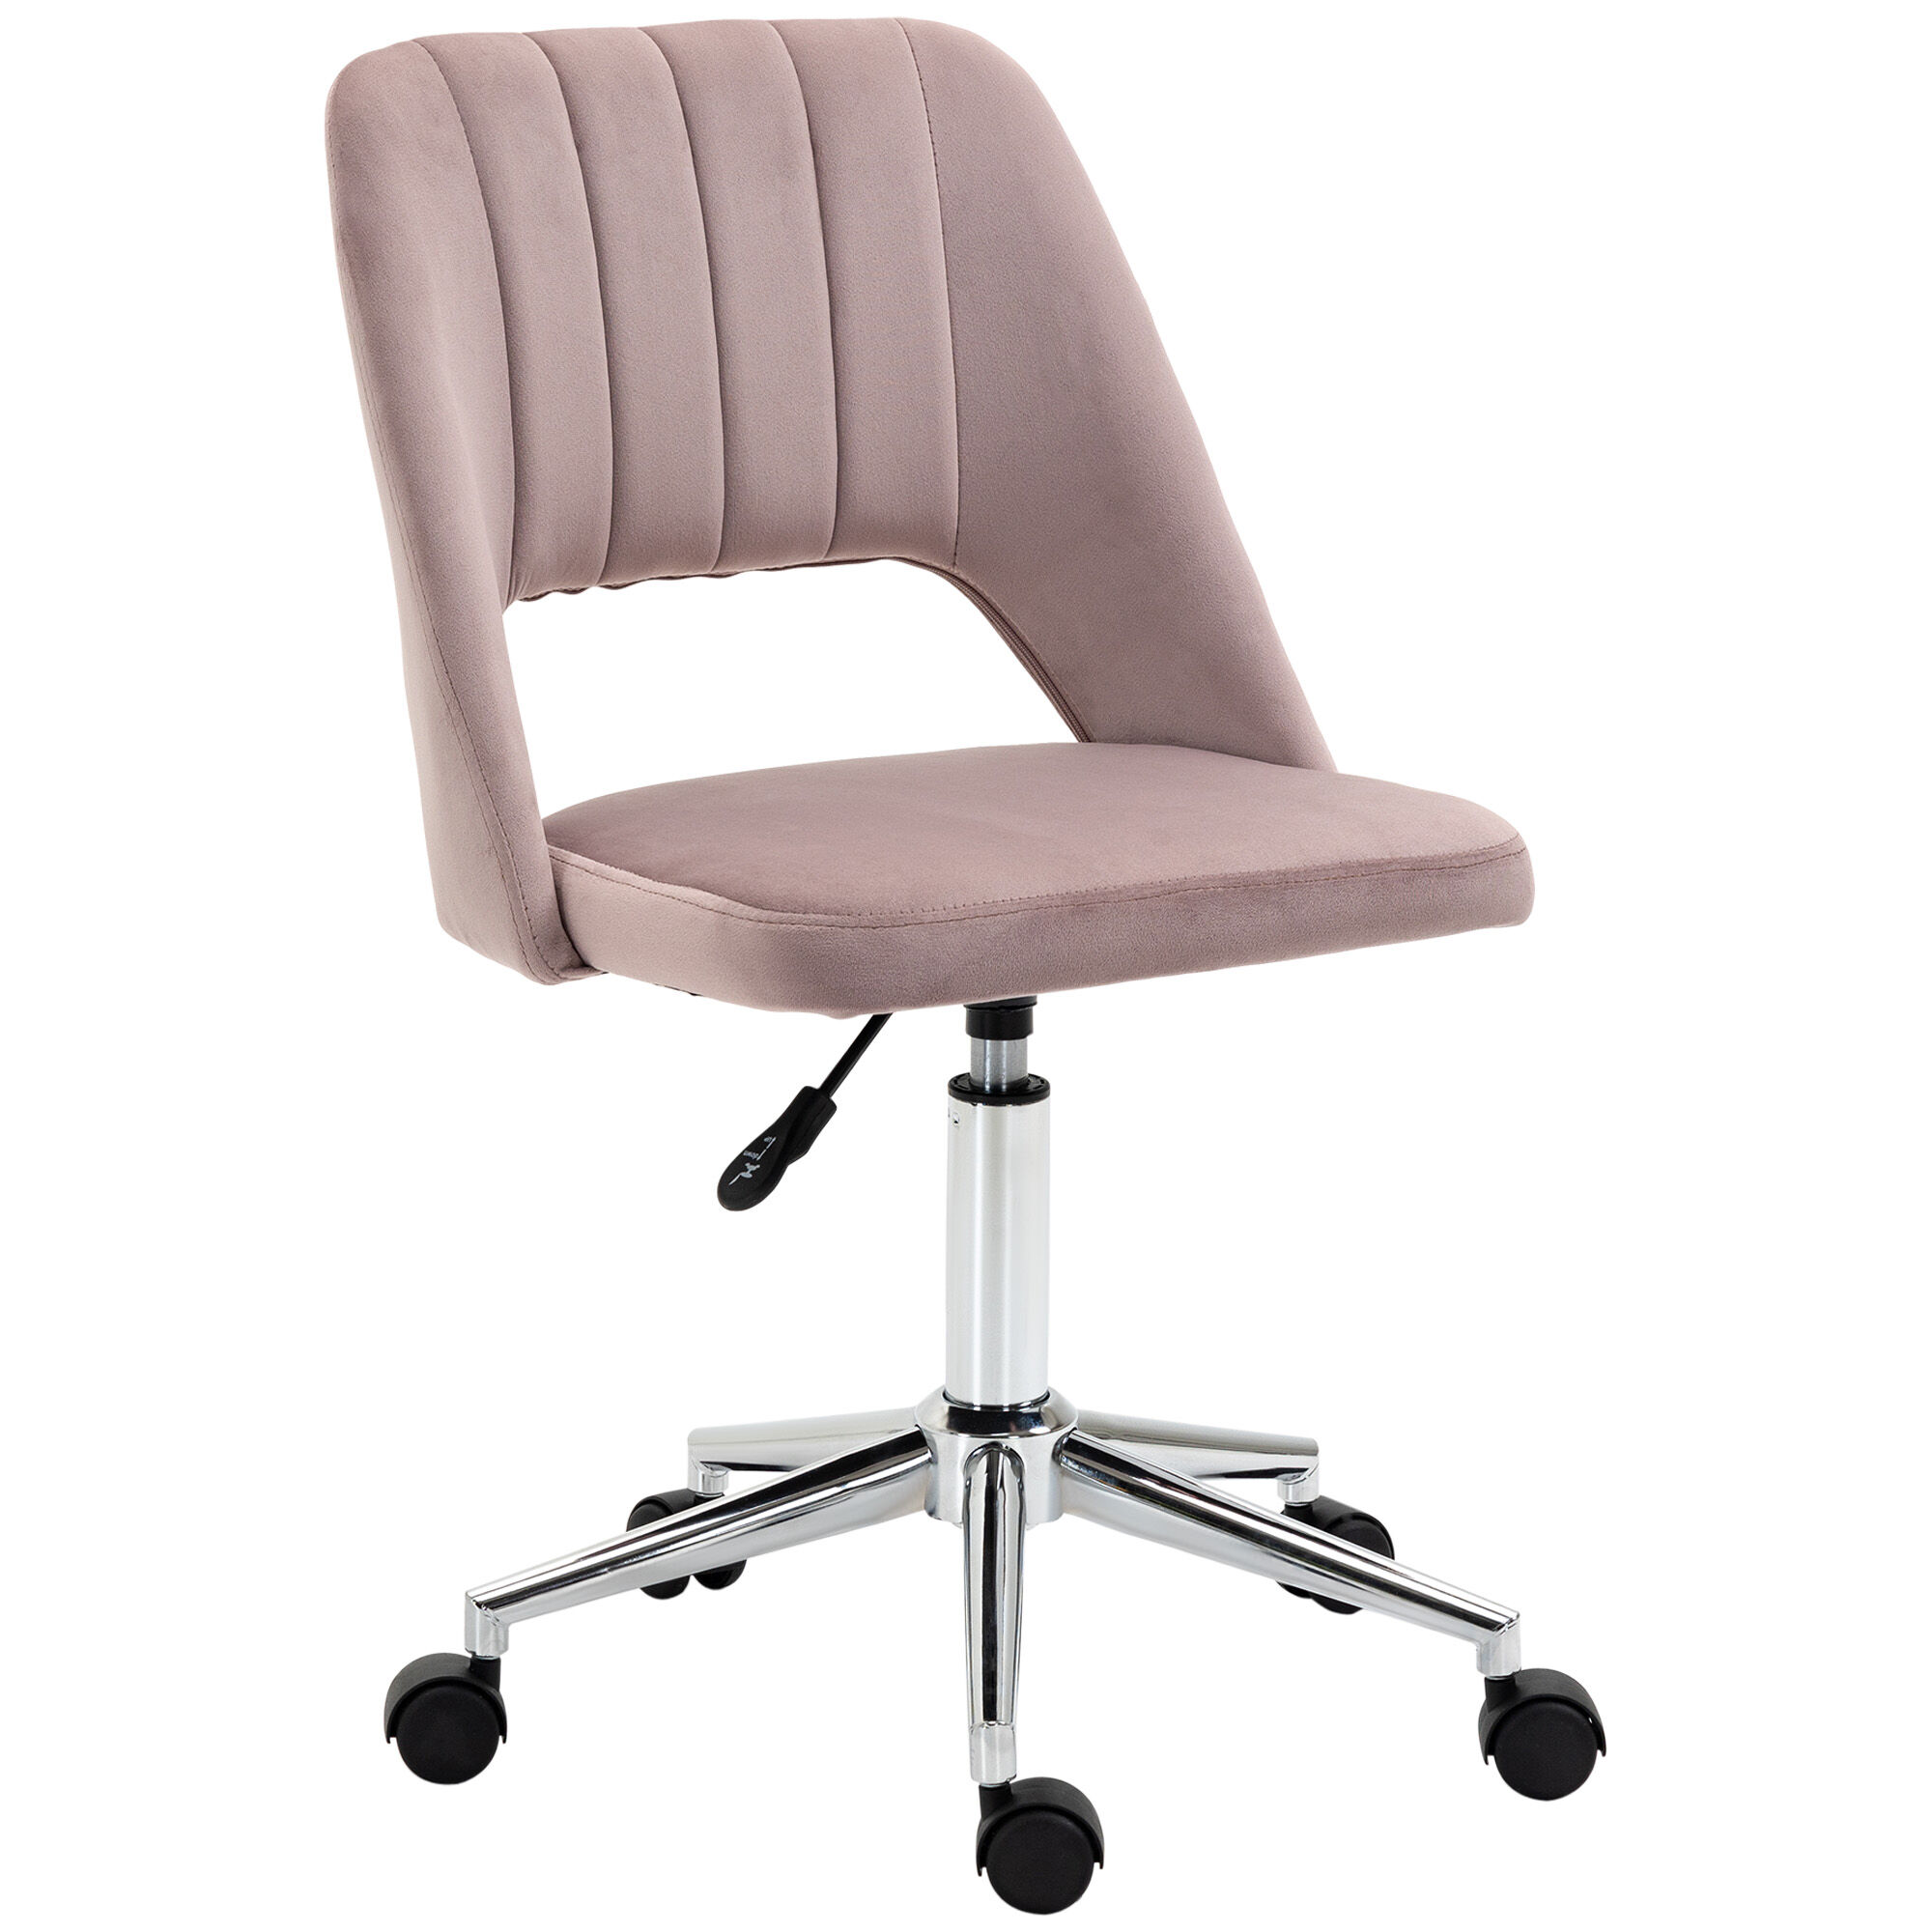 Vinsetto Mid Back Home Office Chair Velvet Fabric Swivel Scallop Shape Computer Desk Chair for Home Study Bedroom, Pink